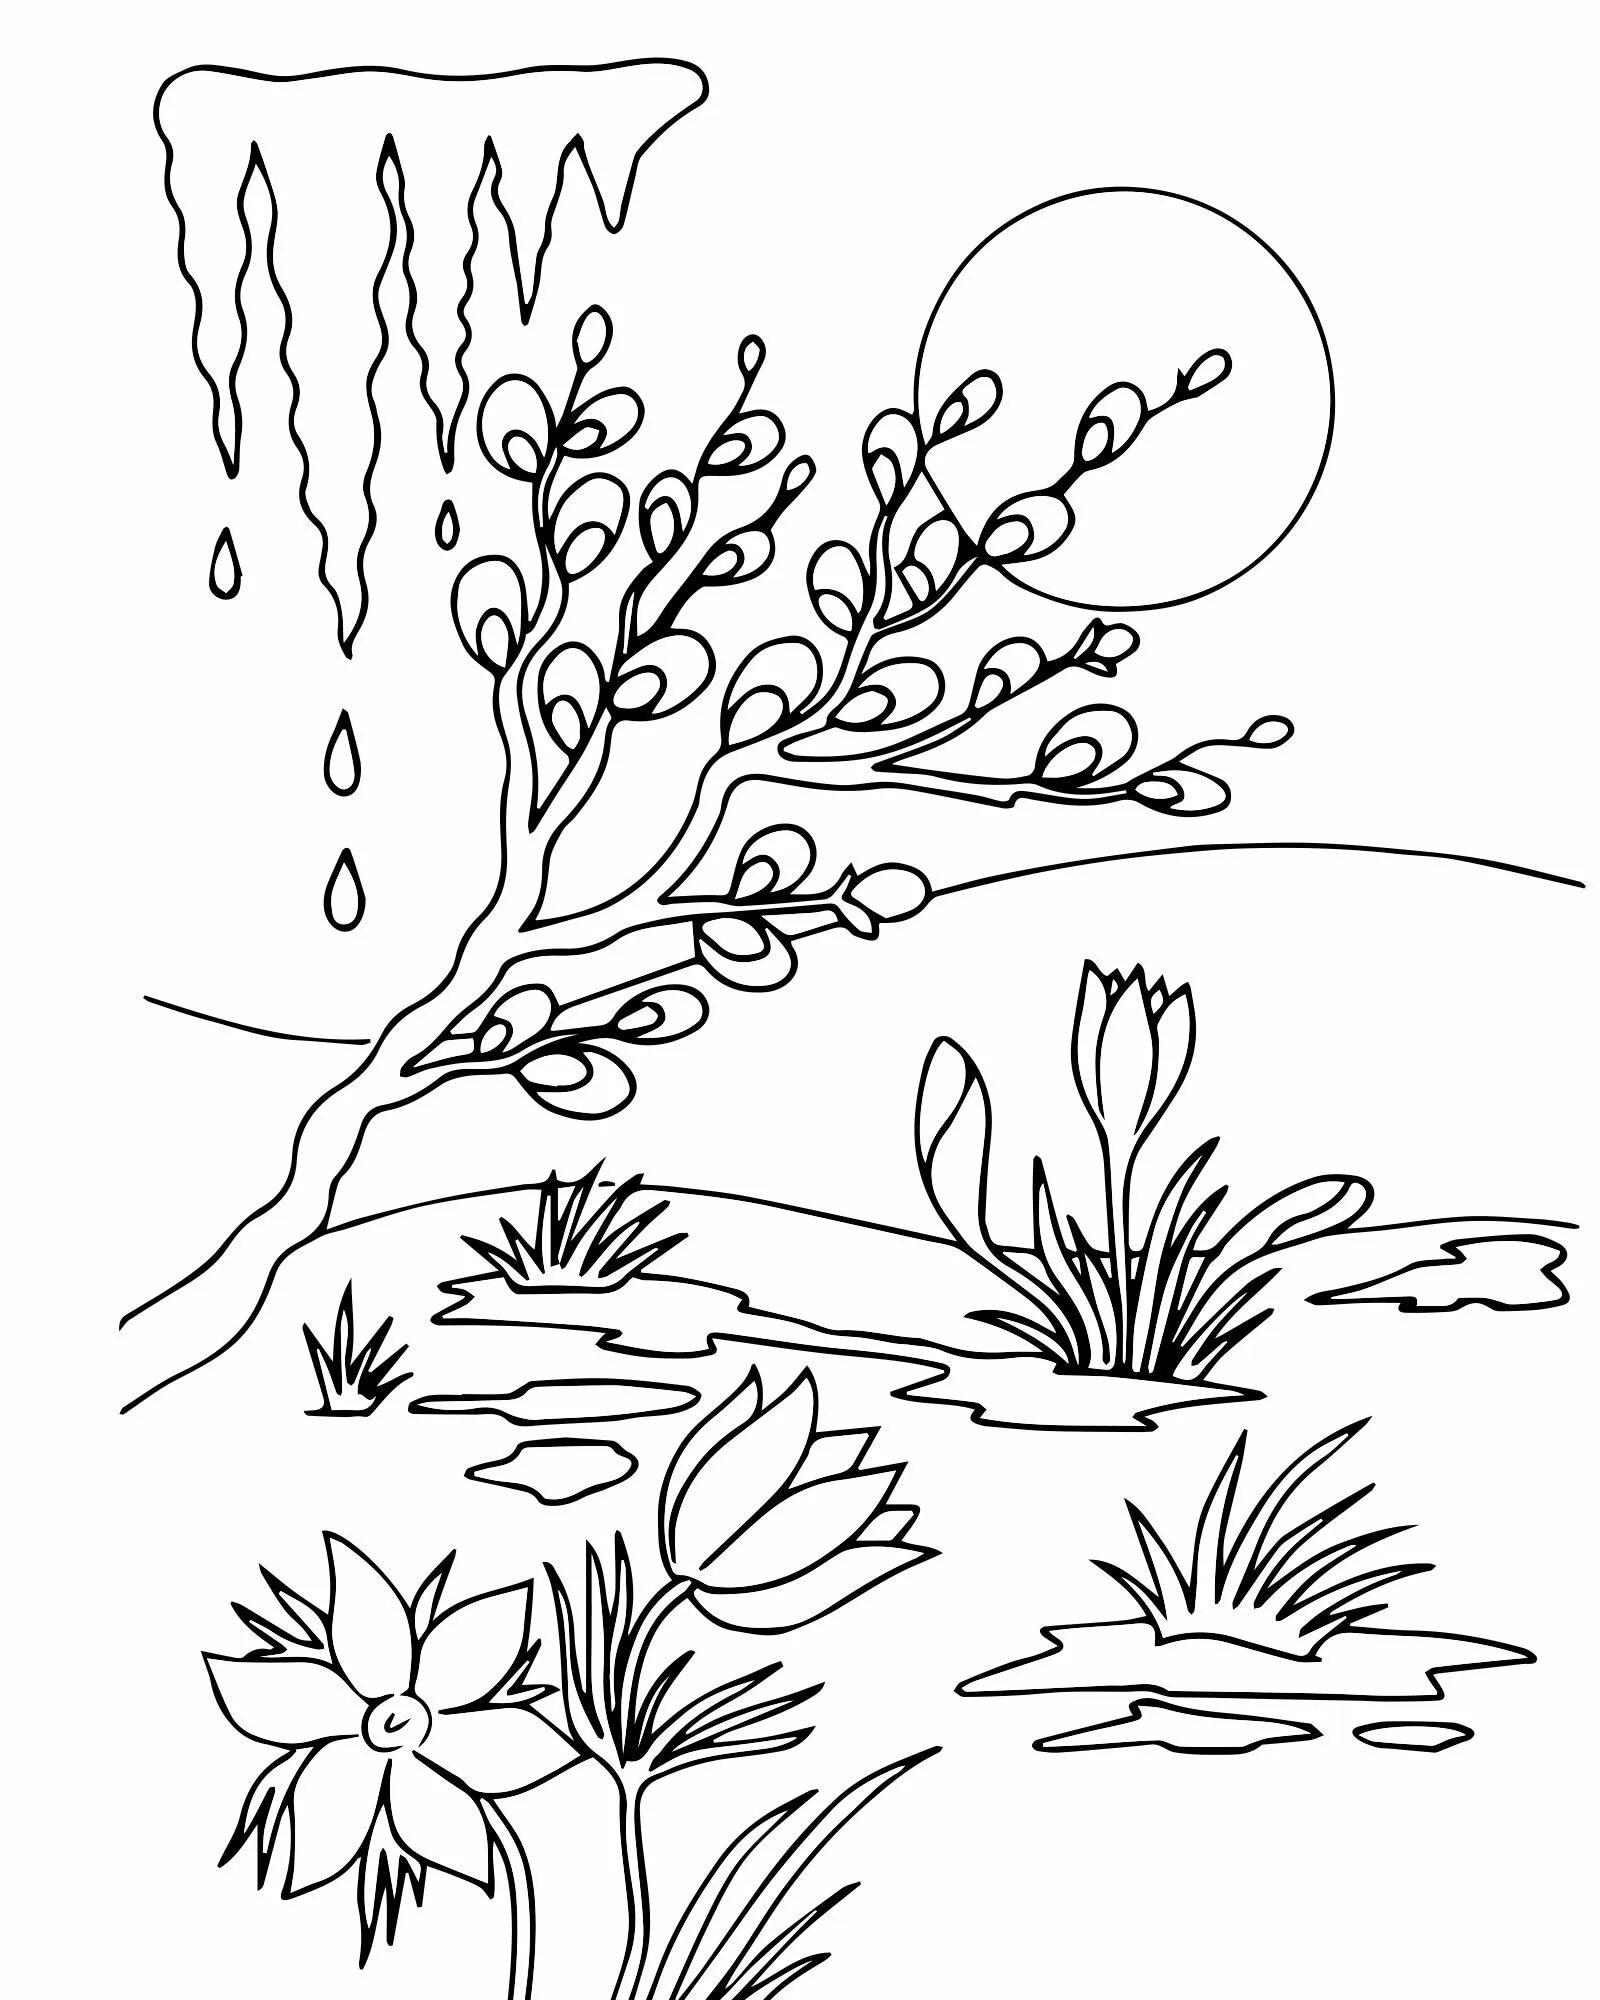 Coloring page sunny spring has come